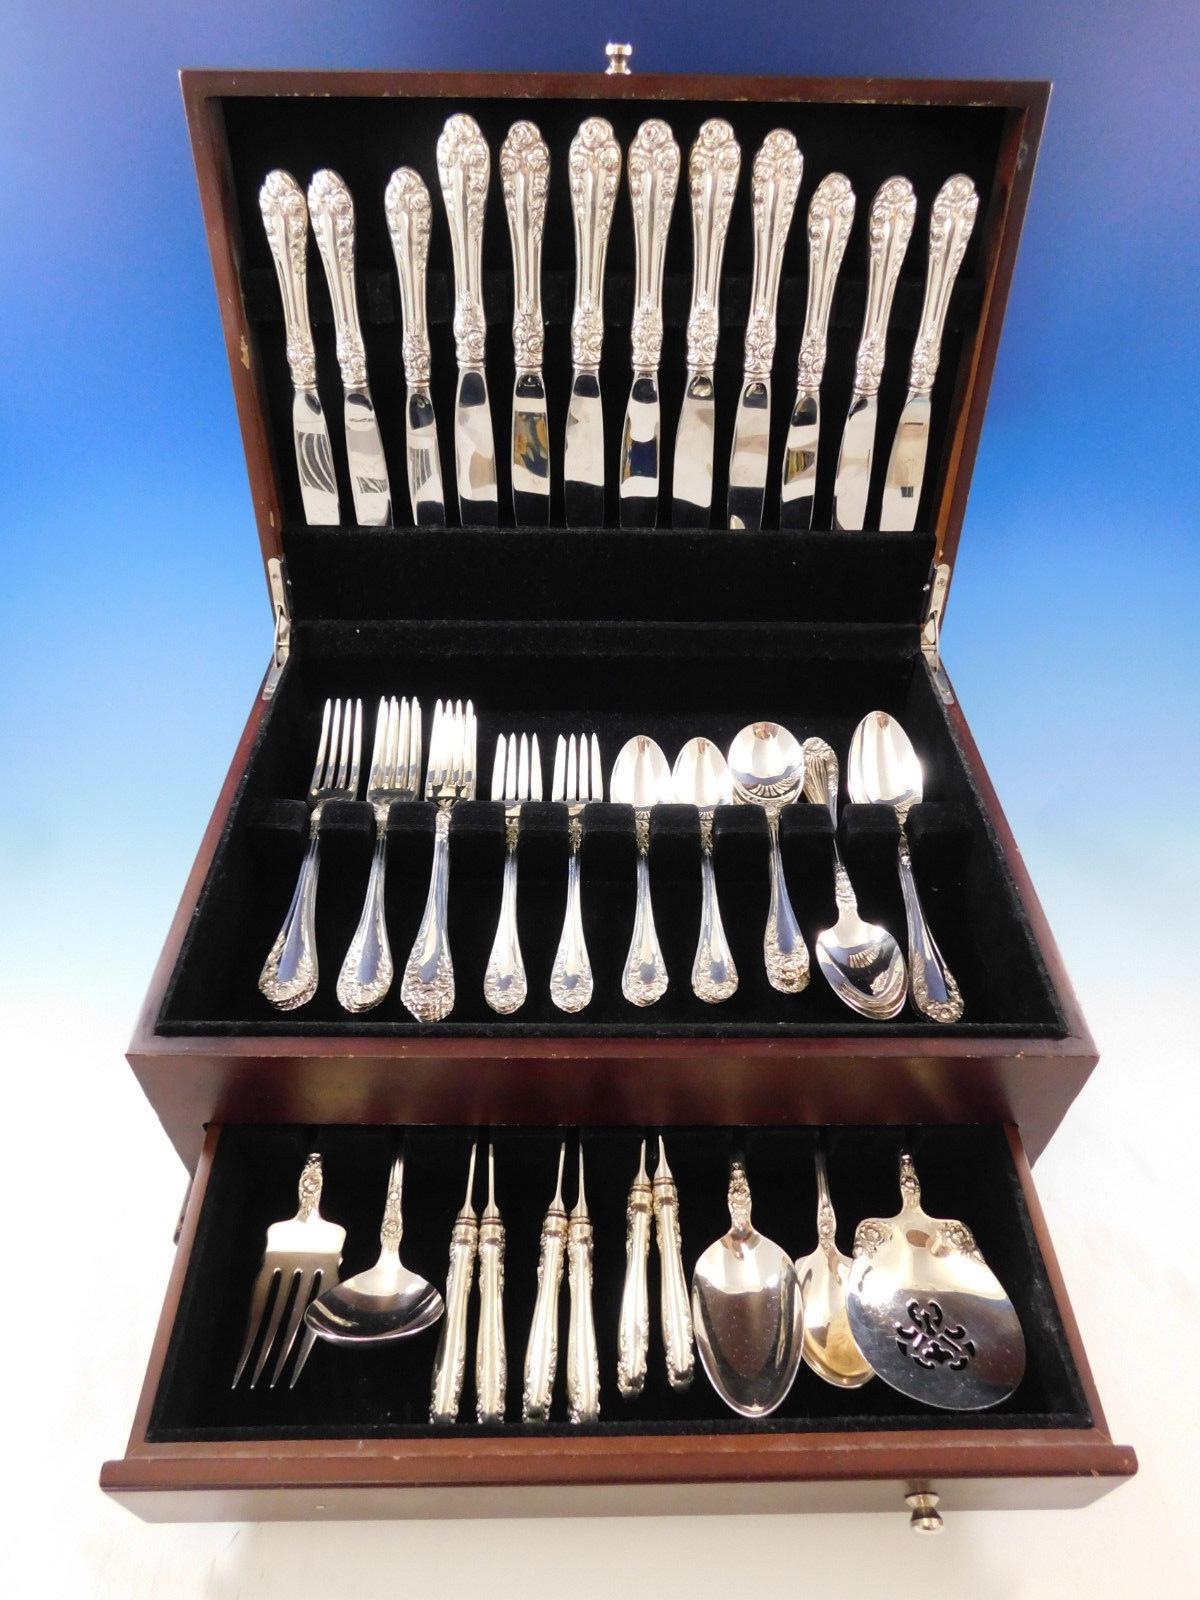 Superb dinner and luncheon Normandie by Northumbria Canada rose motif sterling silver flatware set 59 pieces. This set includes:

Six dinner size knives, 9 7/8